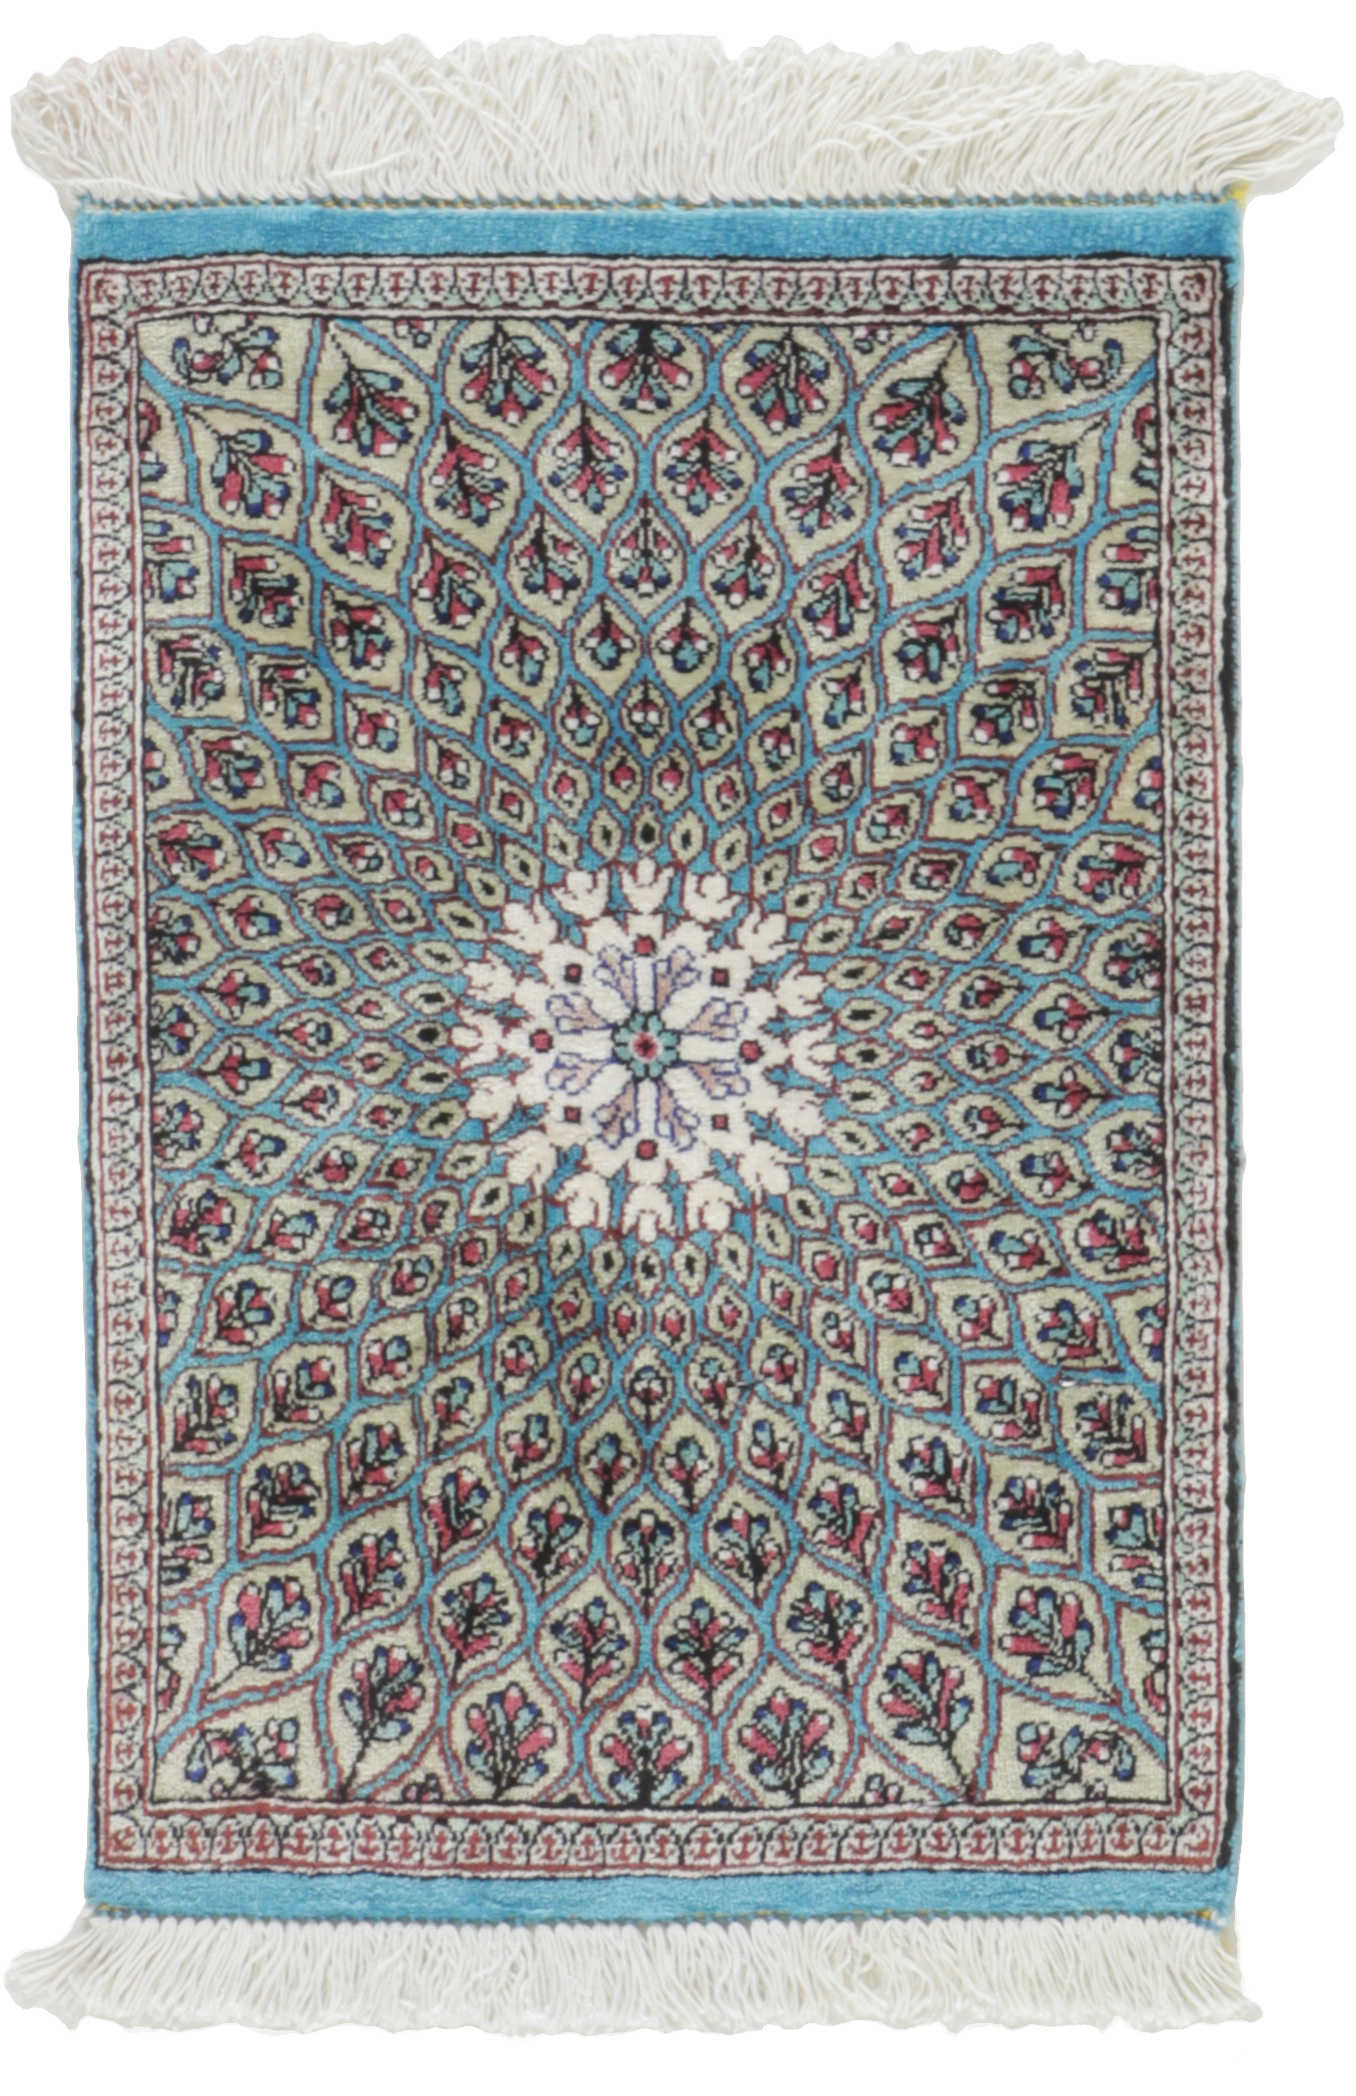 Authentic persian rug with traditional floral design in red and black